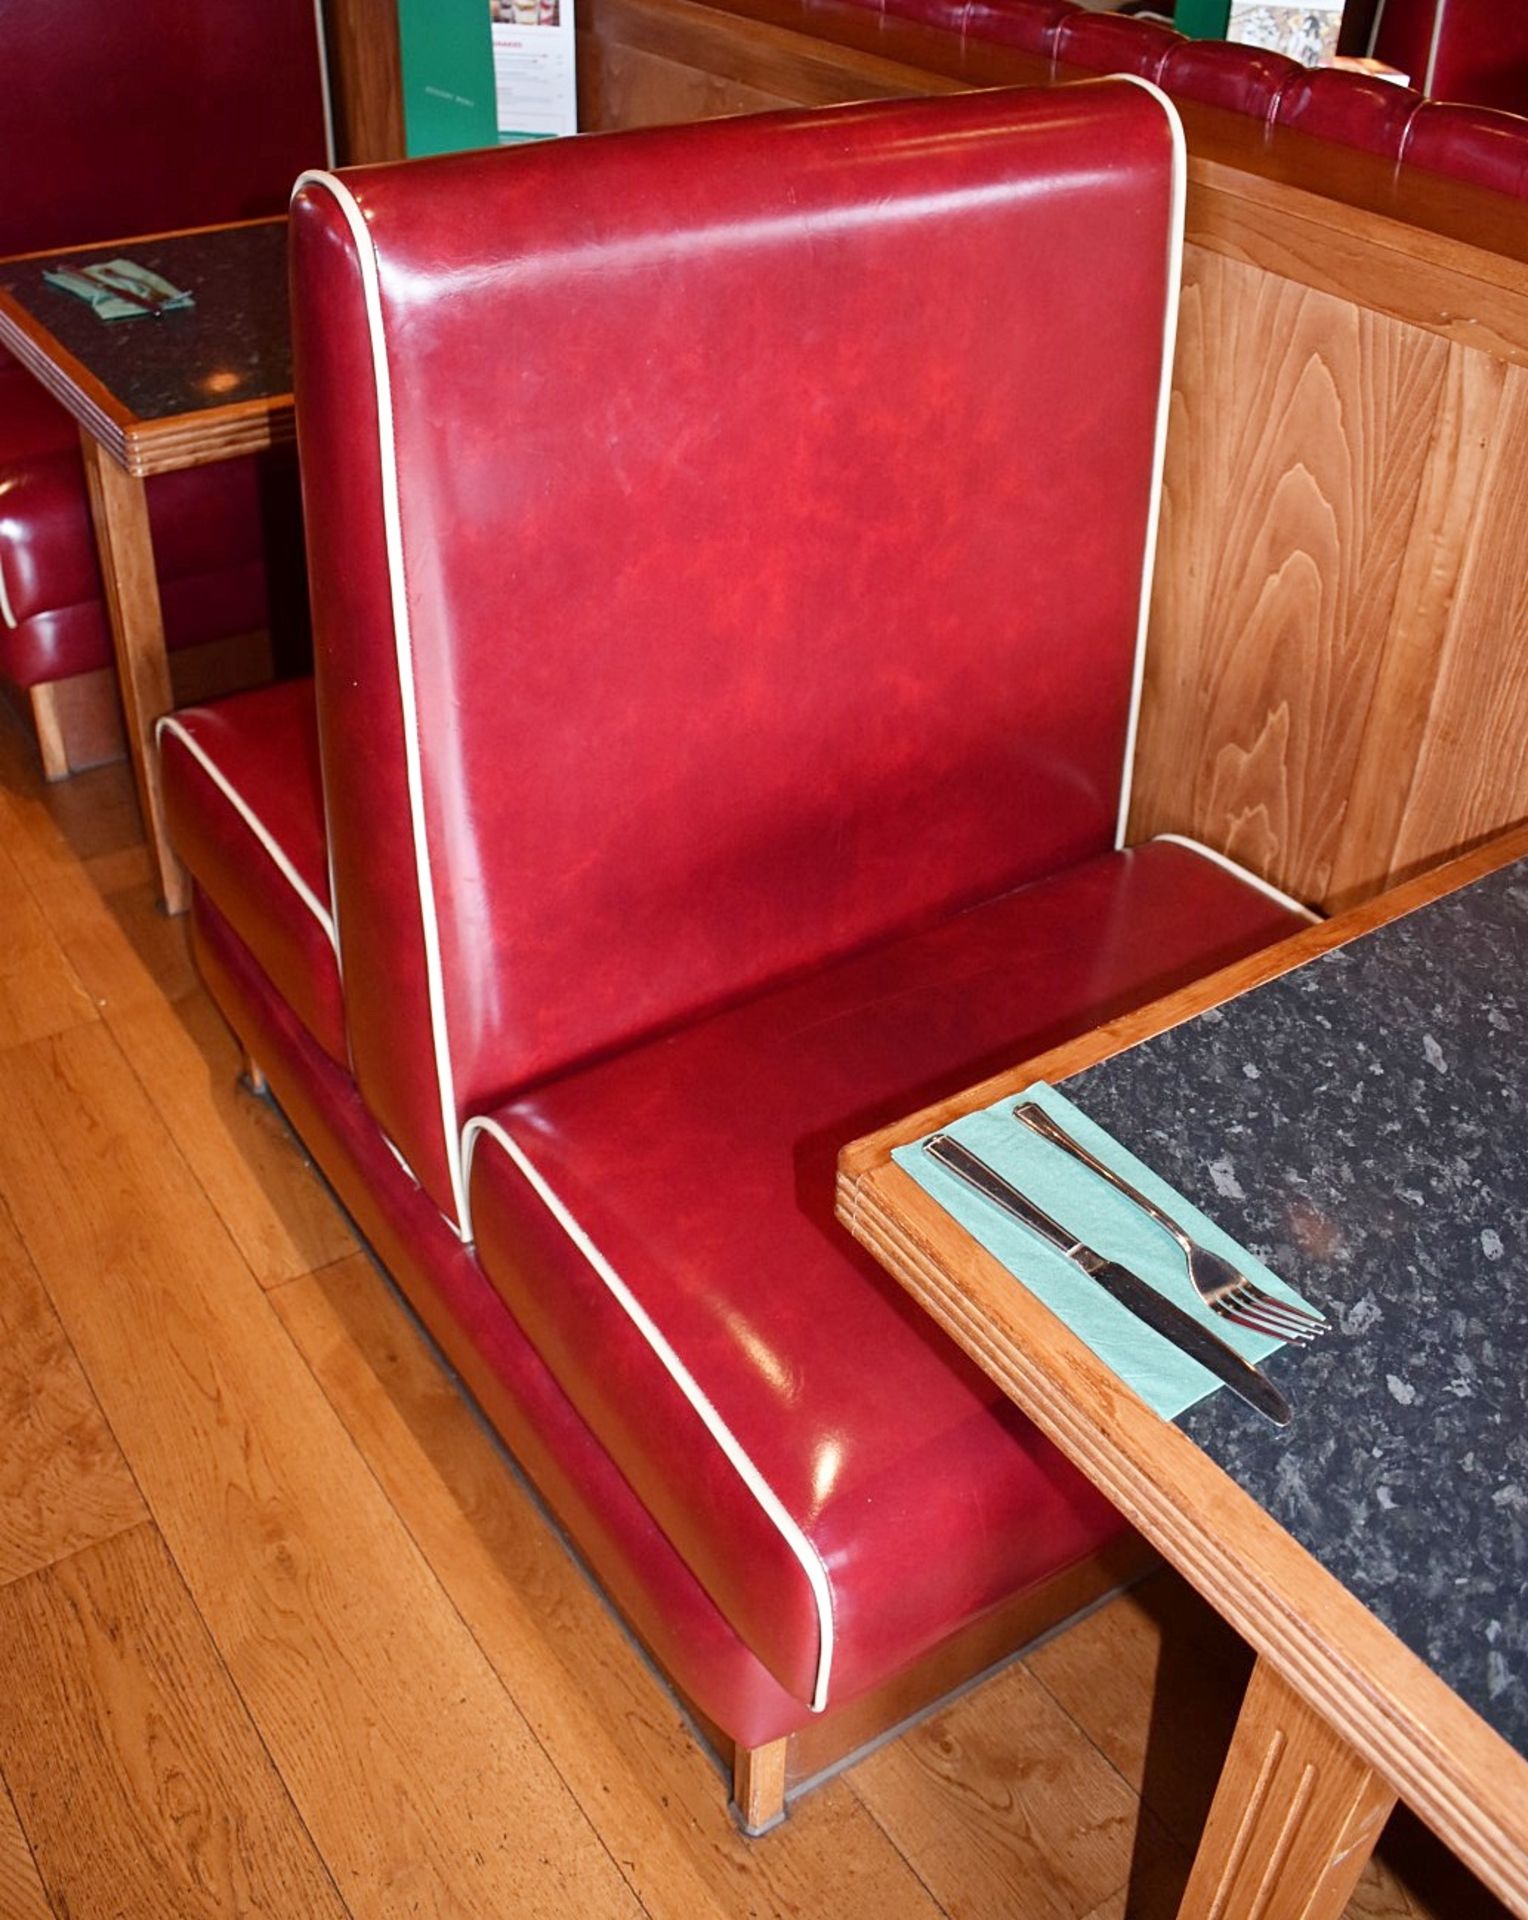 4 x Sections Restaurant Seating - Retro 1950s American Diner Design - Red Faux Leather - Image 6 of 8